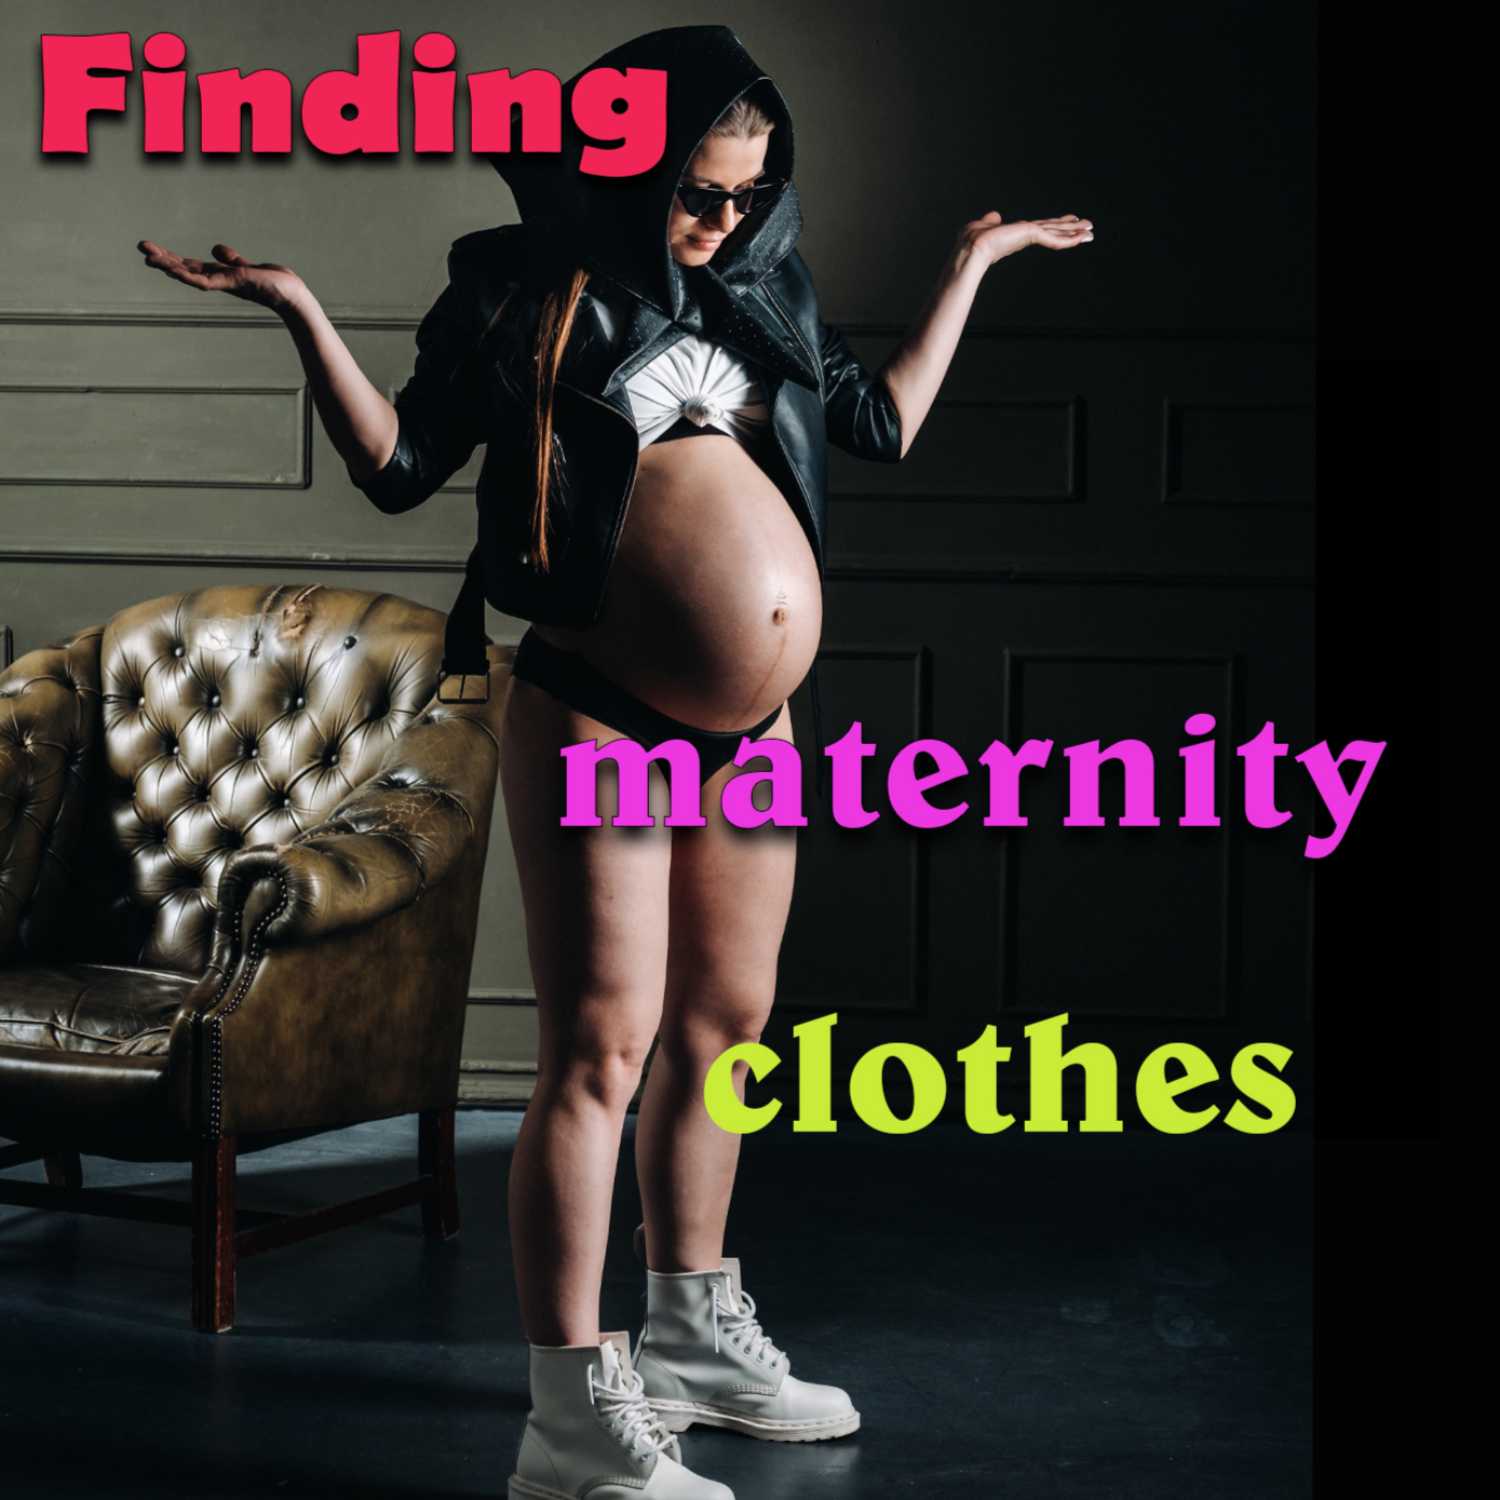 Finding maternity clothes without going broke.